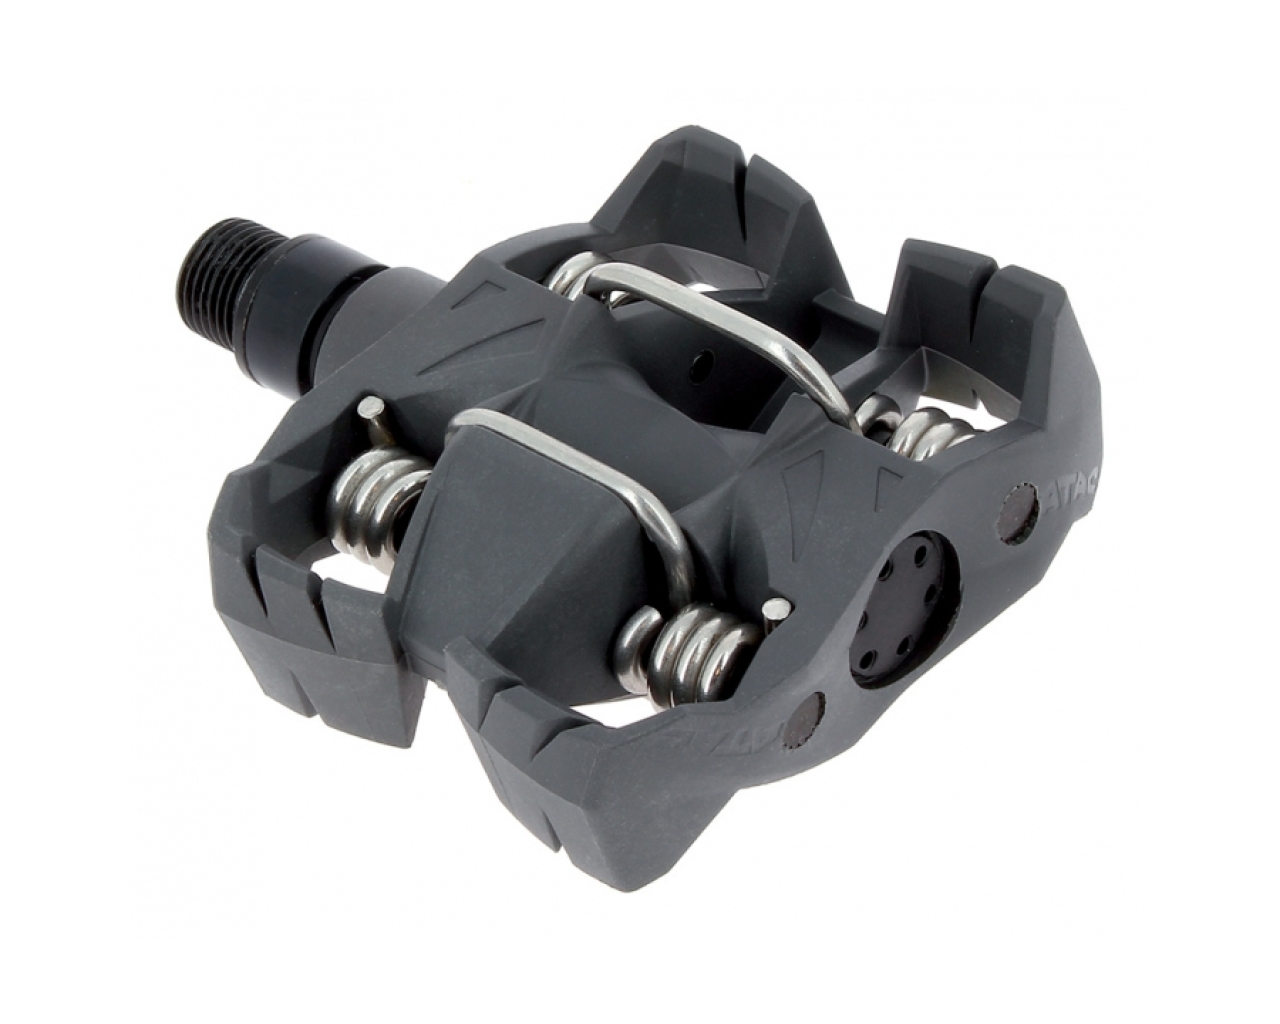 Time Atac MX2 MTB Pedals | Merlin Cycles